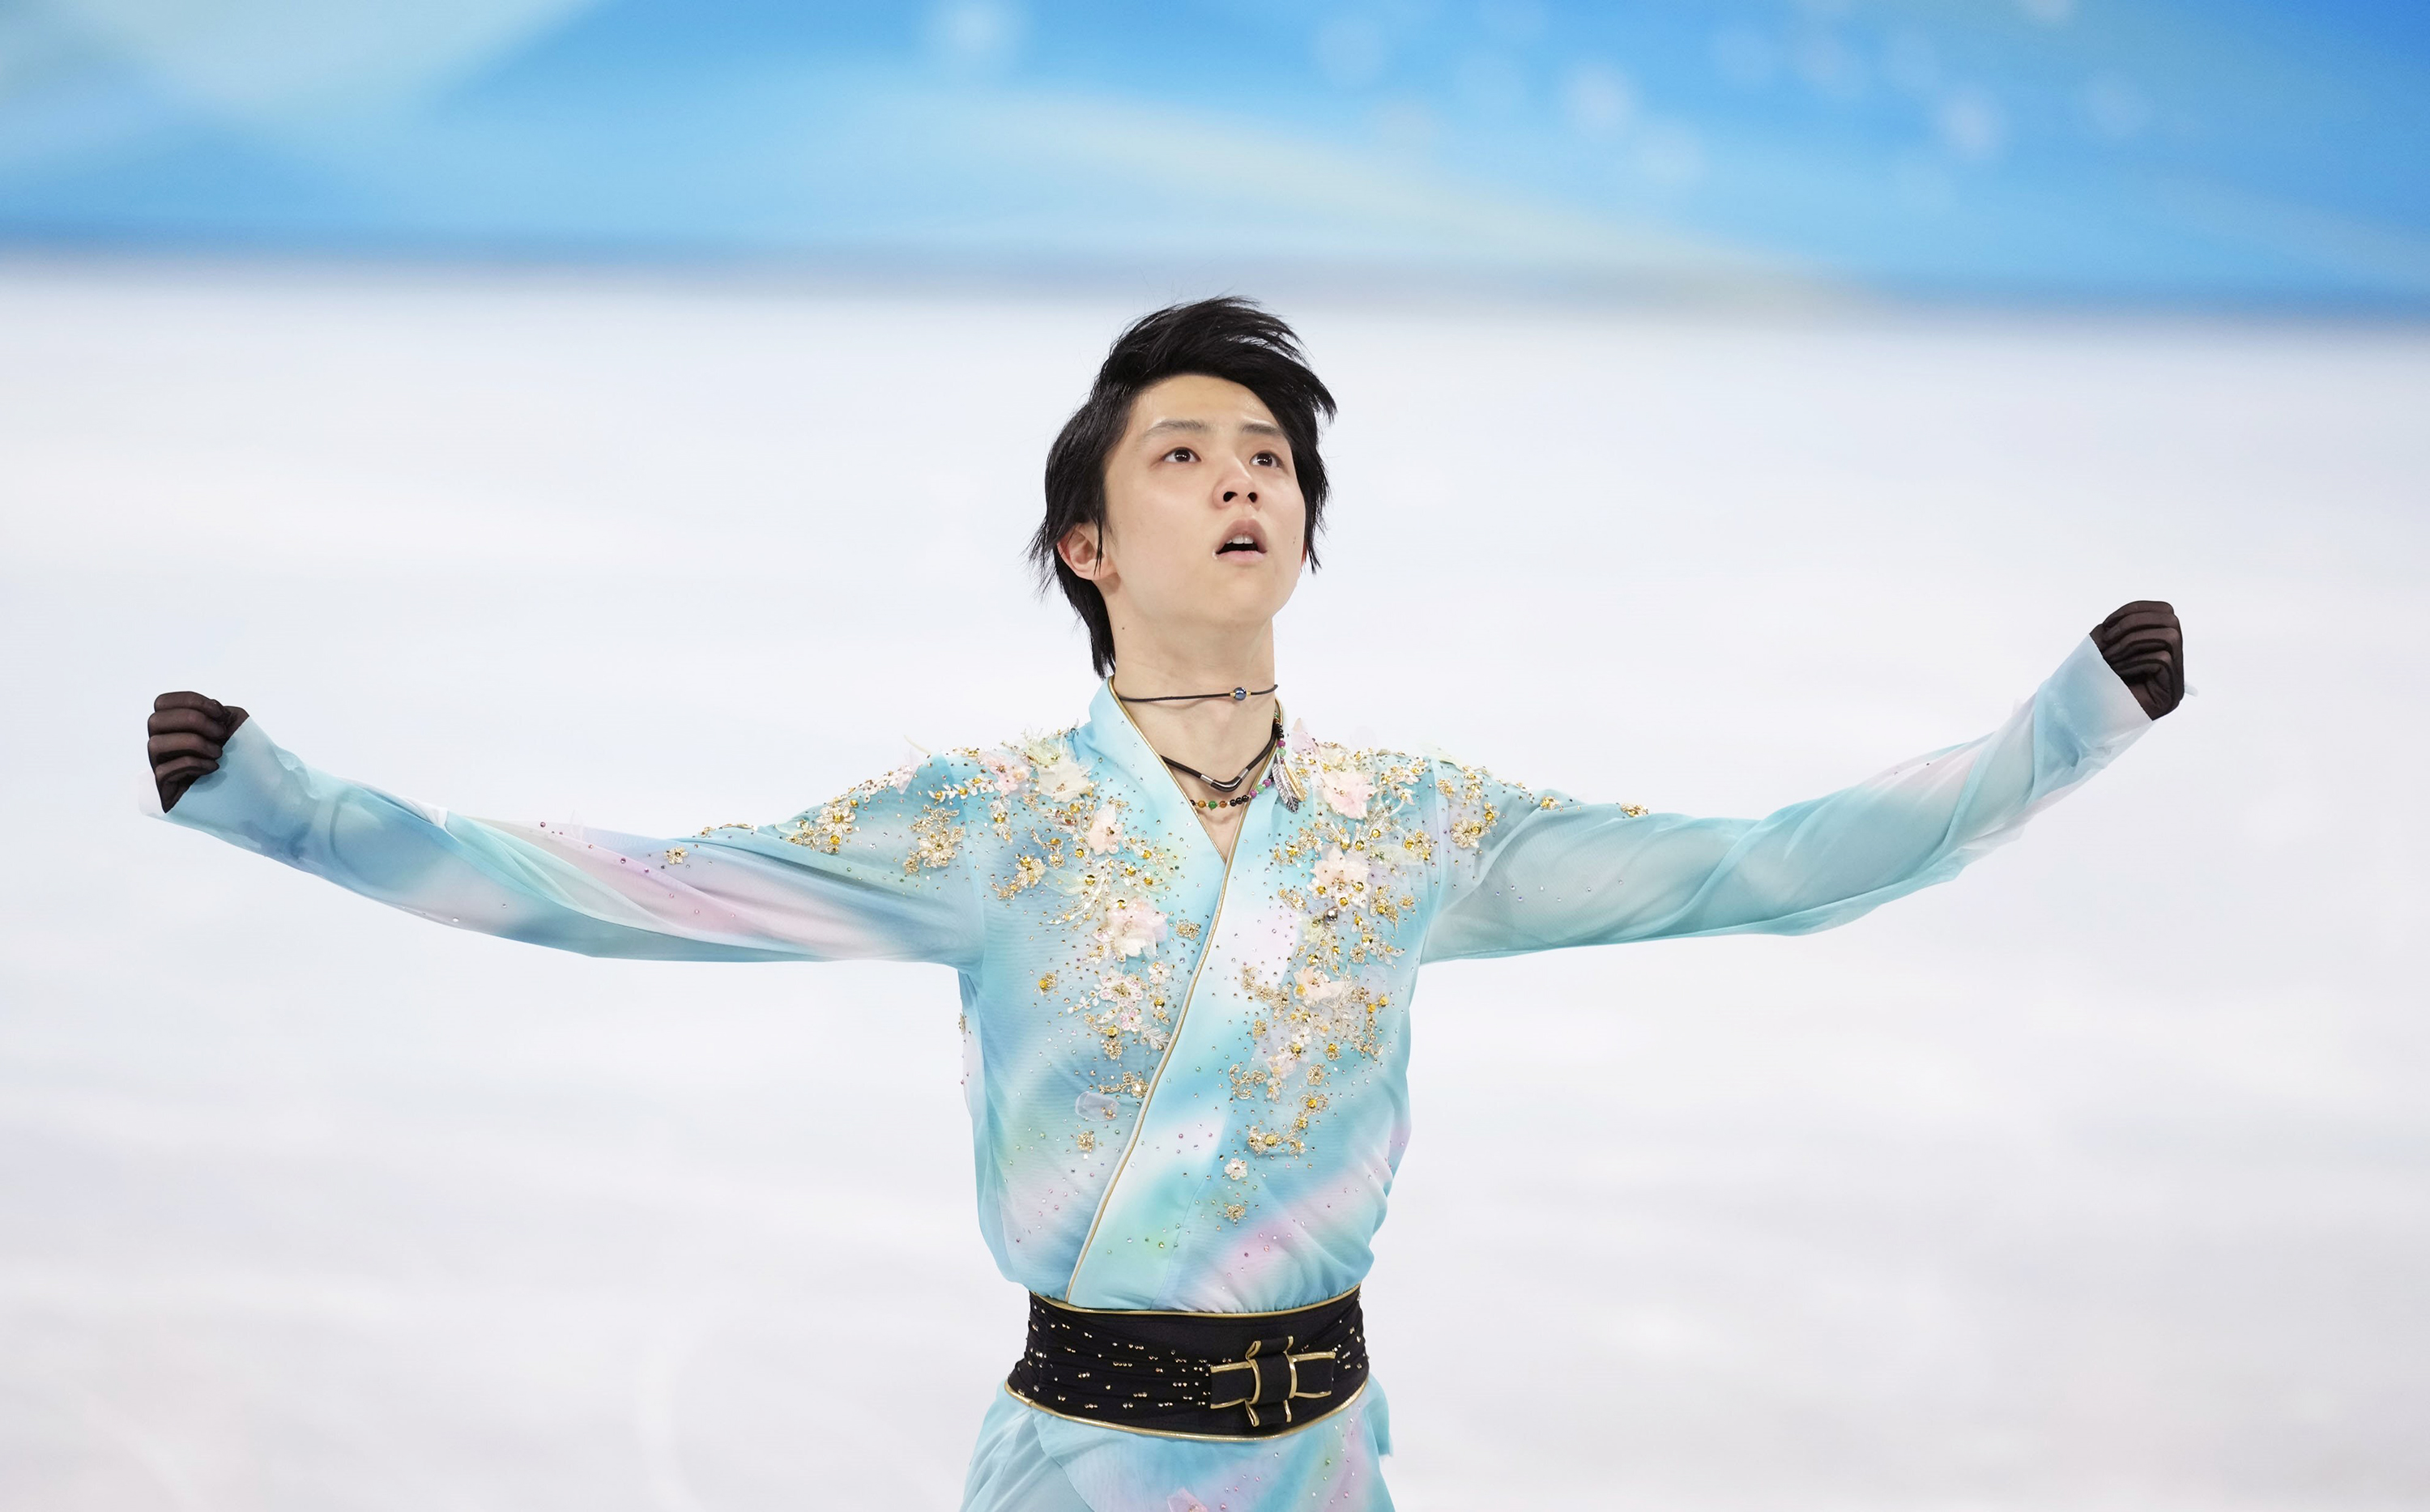 Yuzuru Hanyu finished fourth in the men's figure skating free skate on February 10, but his legion of fans remain ever faithful. 